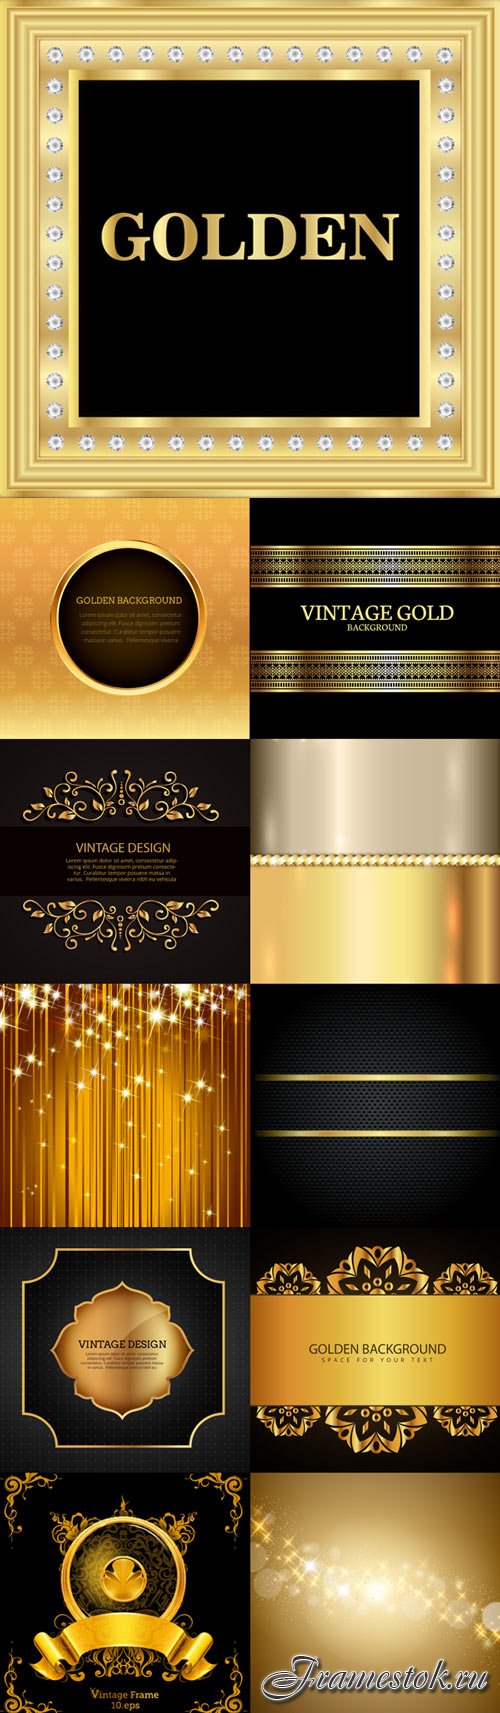 Gold stylish backgrounds vector graphics set 2